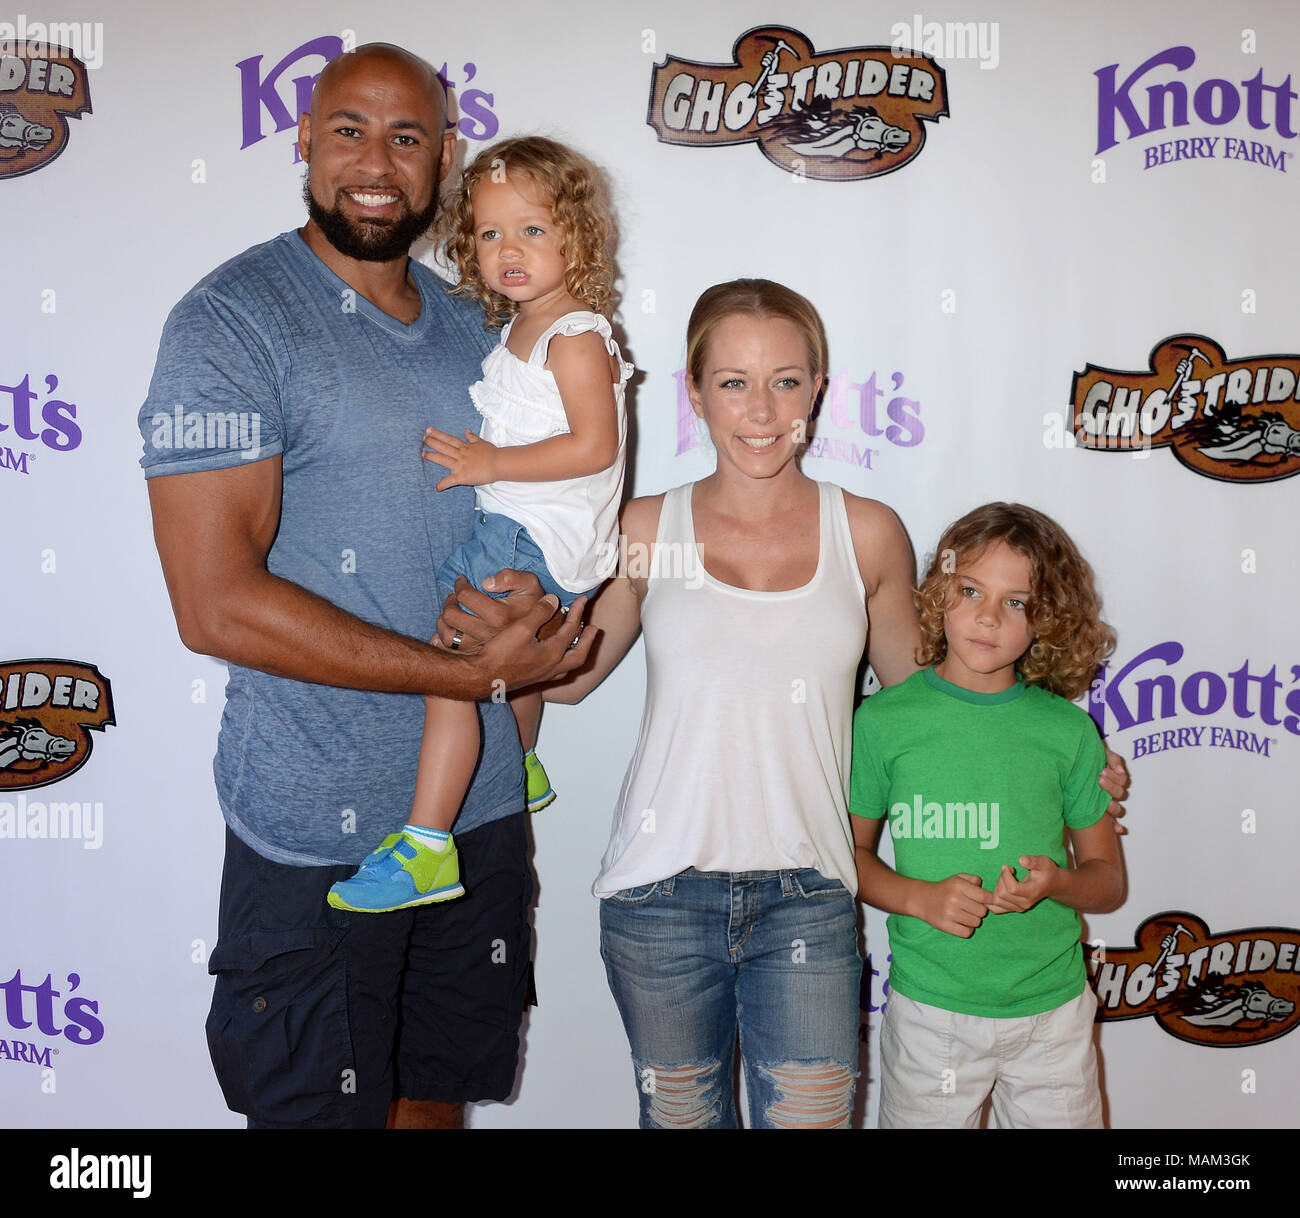 BUENA PARK, CA - JUNE 04: Kendra Wilkinson and Jiffpom attend the GhostRider Reopening at Knott's Berry Farm on June 4, 2016 in Buena Park, California.  People:  Kendra Wilkinson, husband Hank Baskett, daughter Alijah Mary Baskett, son Hank Baskett IV Stock Photo